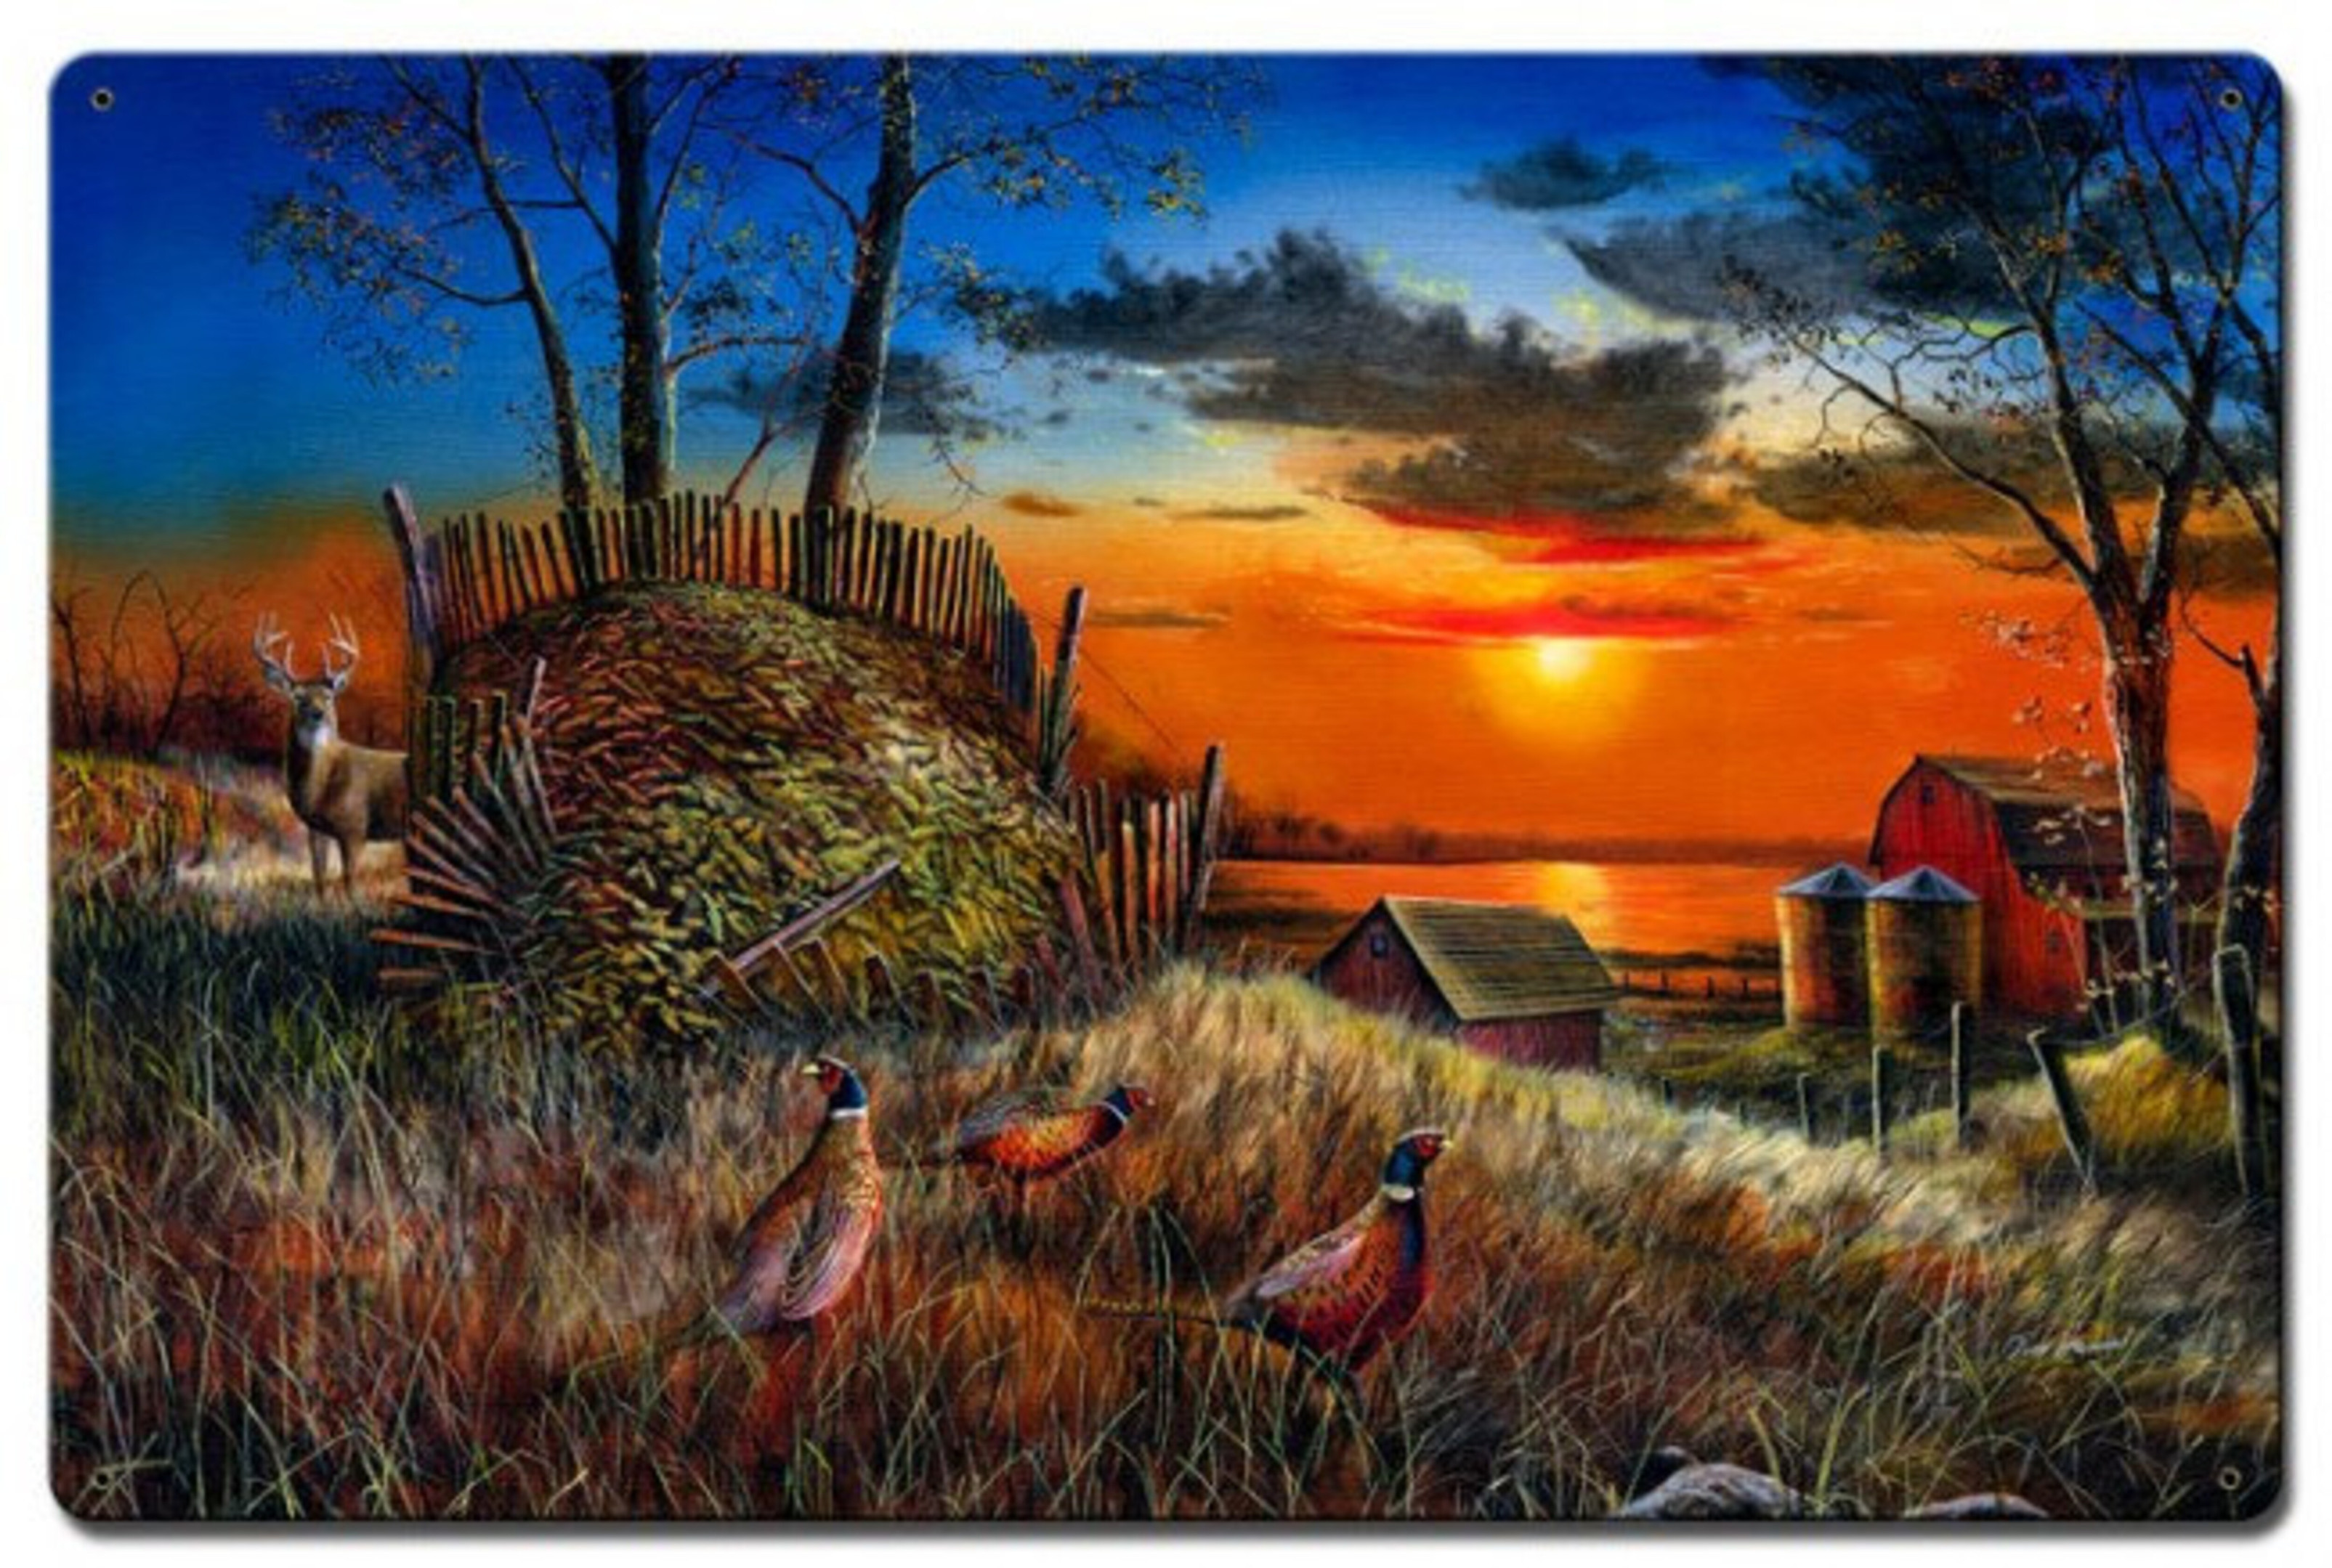 Sharing The Bounty by Jim Hansel Satin Finish Art on Metal Cabin Lodge Country home decor wall art